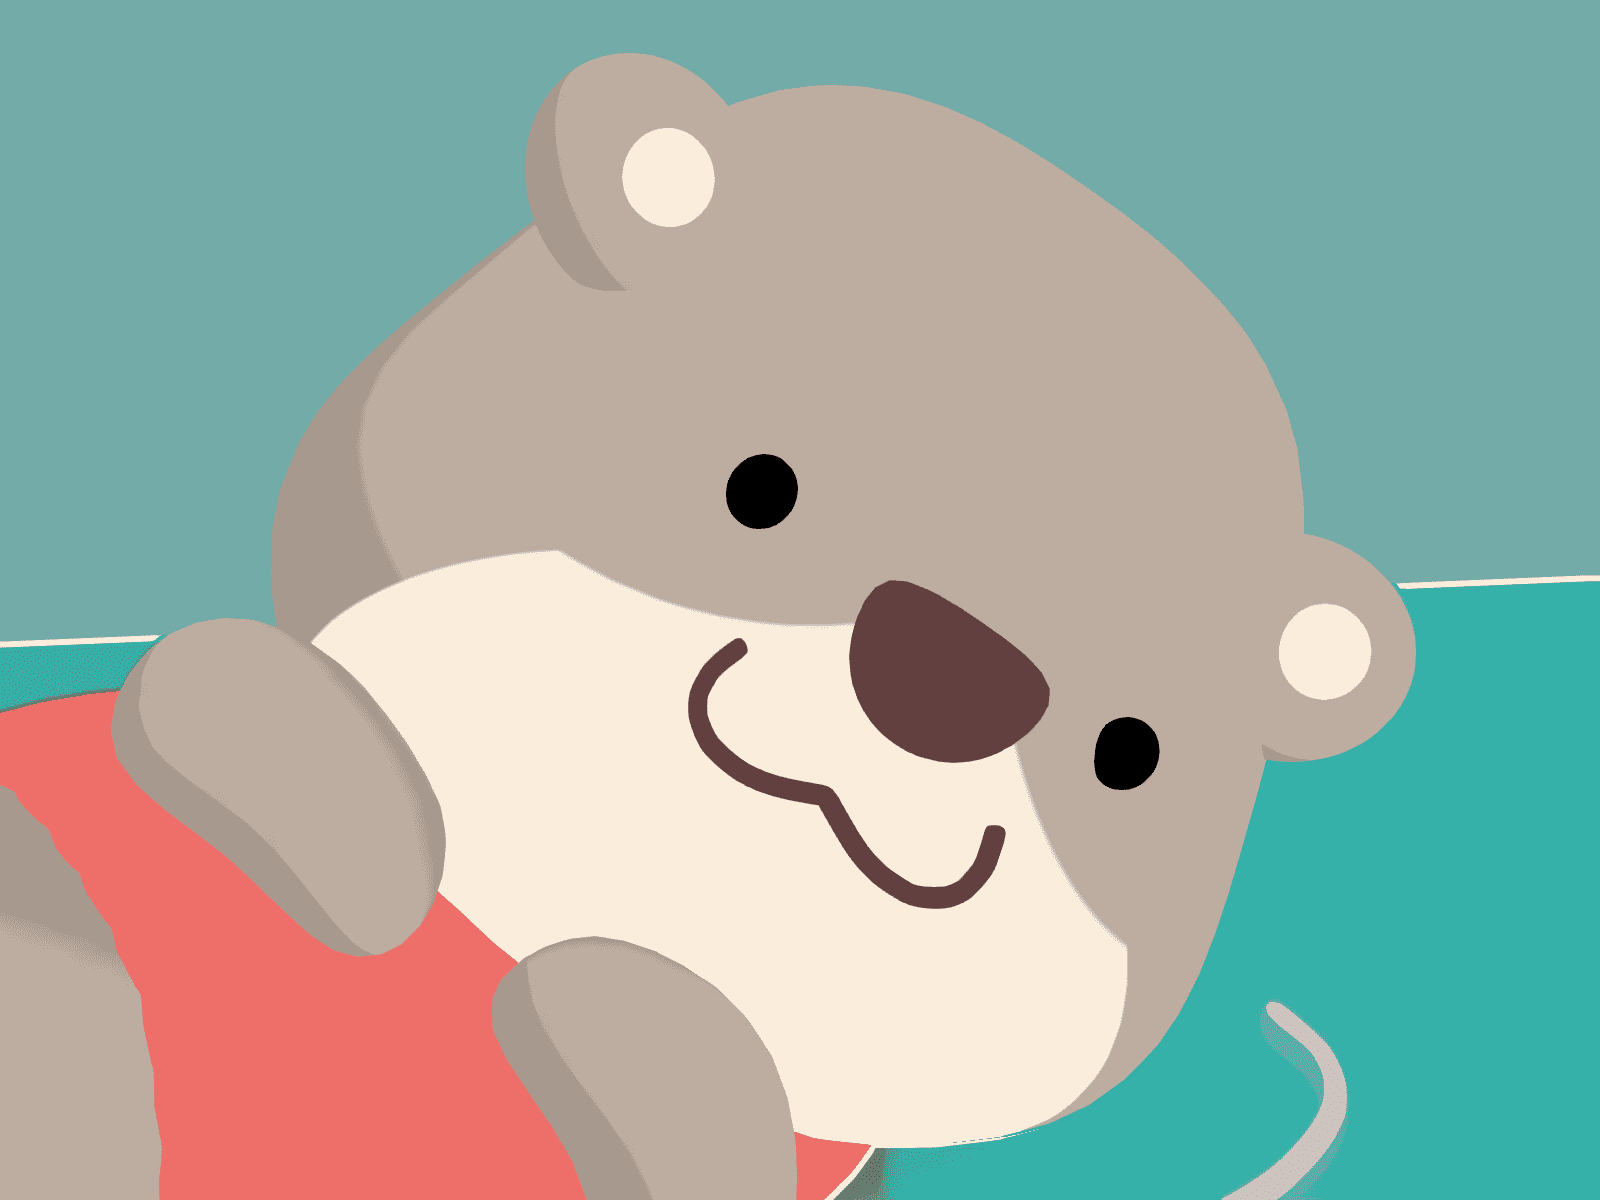 Otter's face in 3D